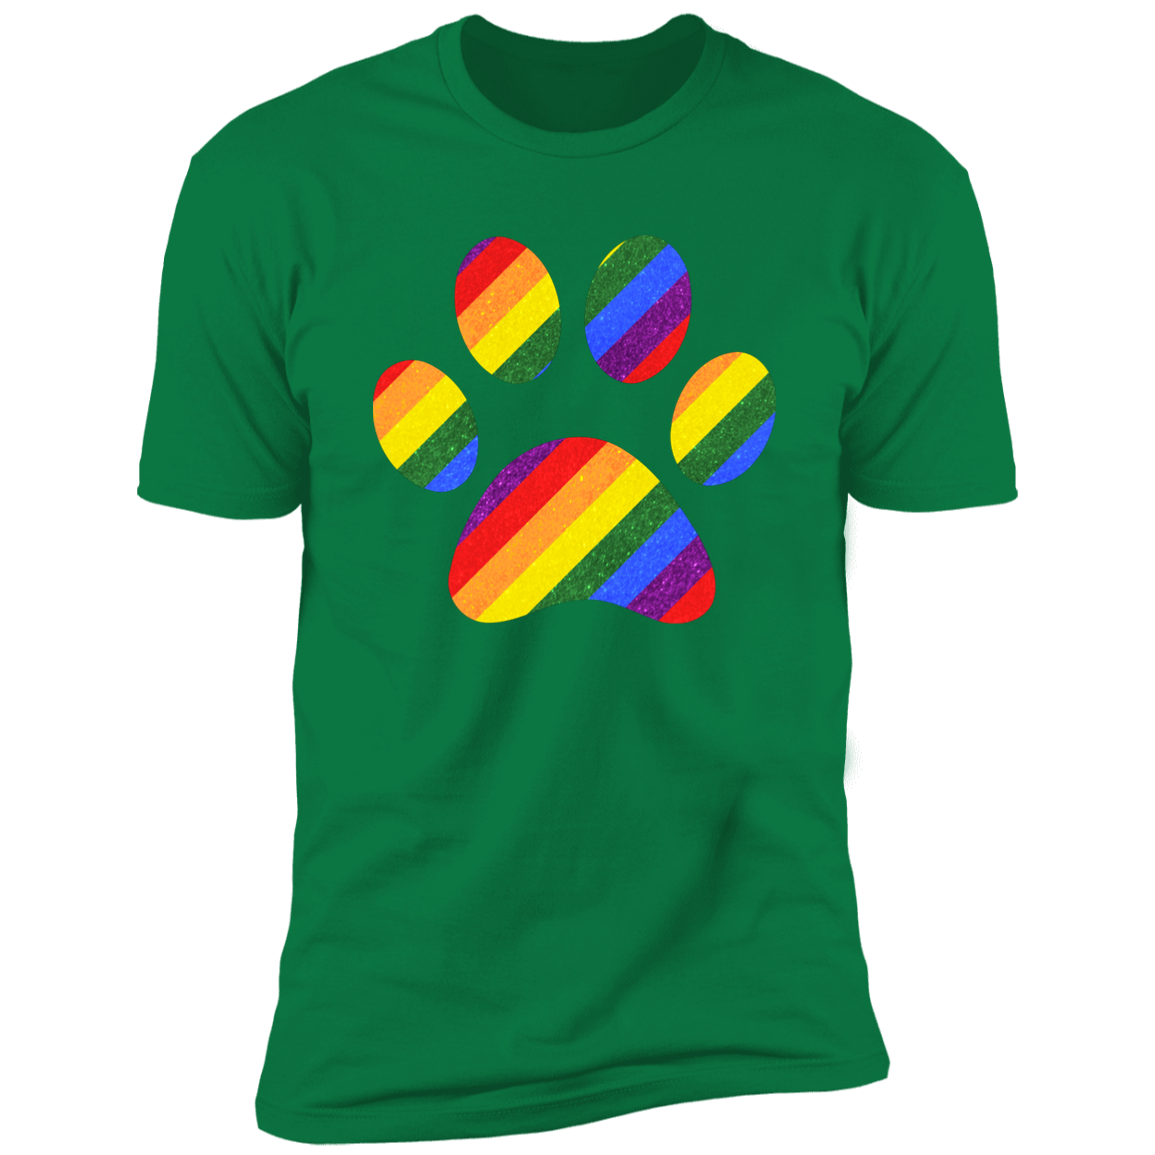 Pride Paw (Sparkles) Pride T-shirt, Paw Pride Dog Shirt for humans, in kelly green